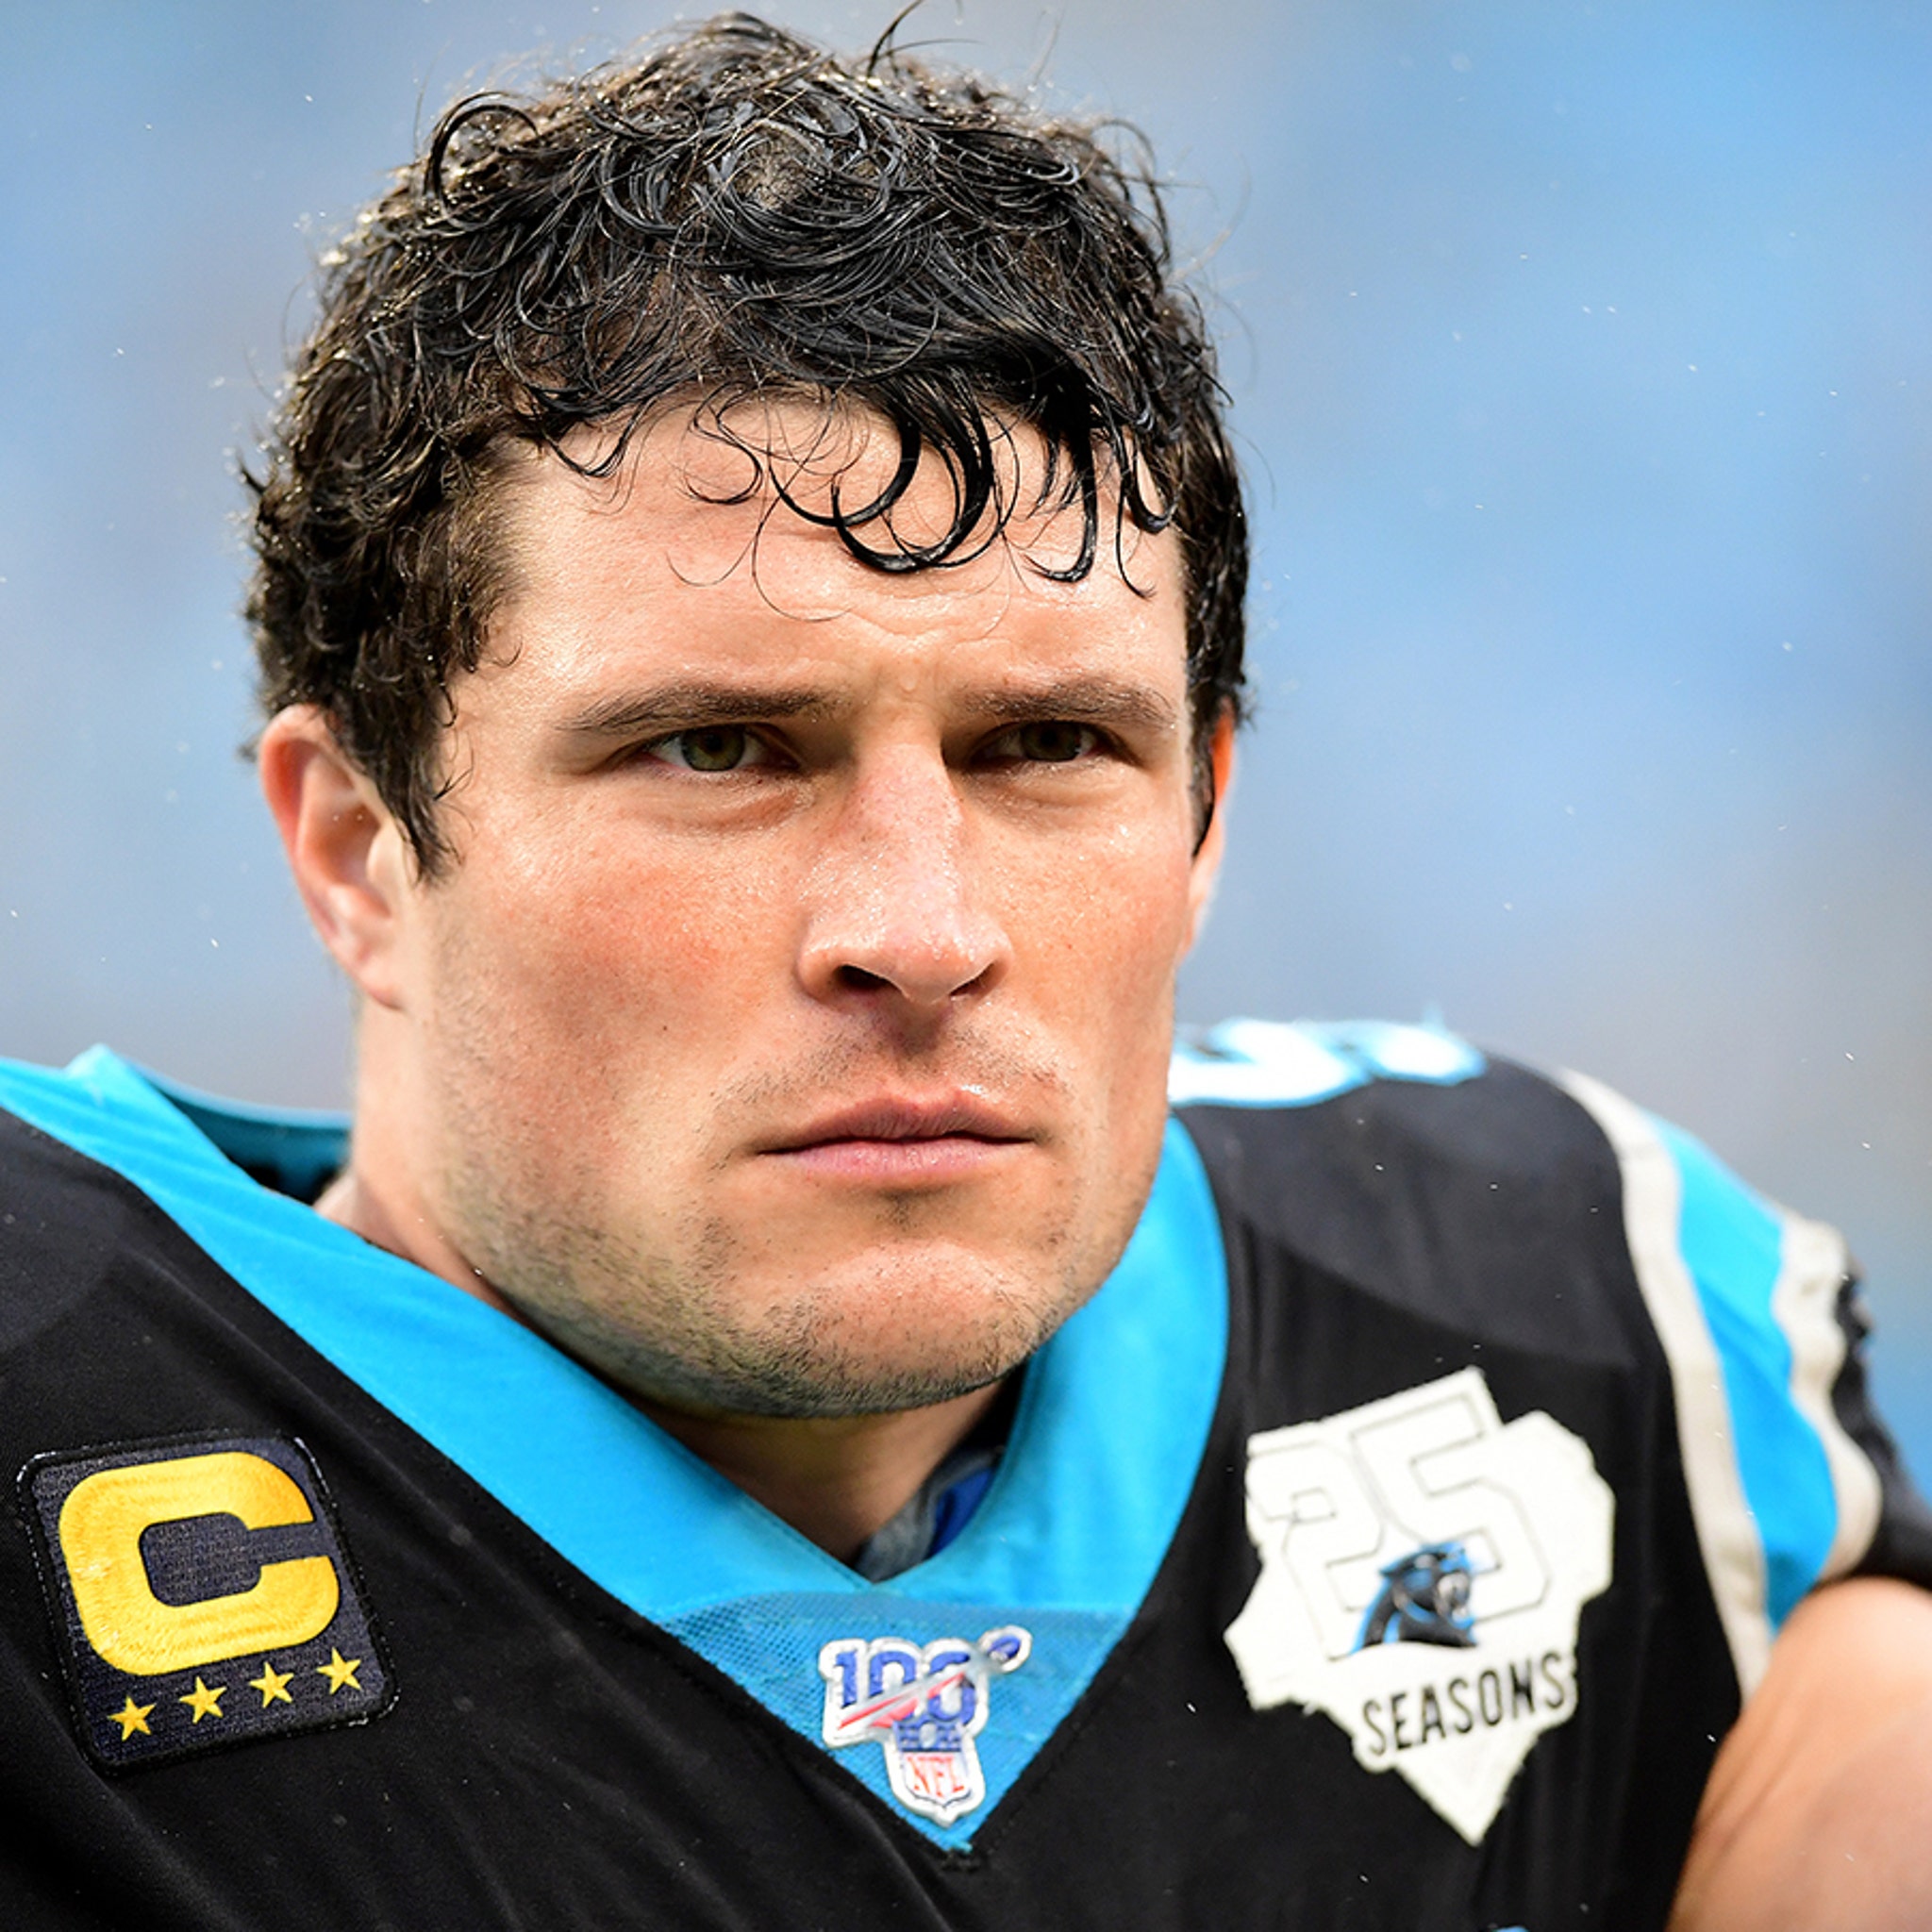 Panthers Star Luke Kuechly Retires From NFL After 8 Seasons